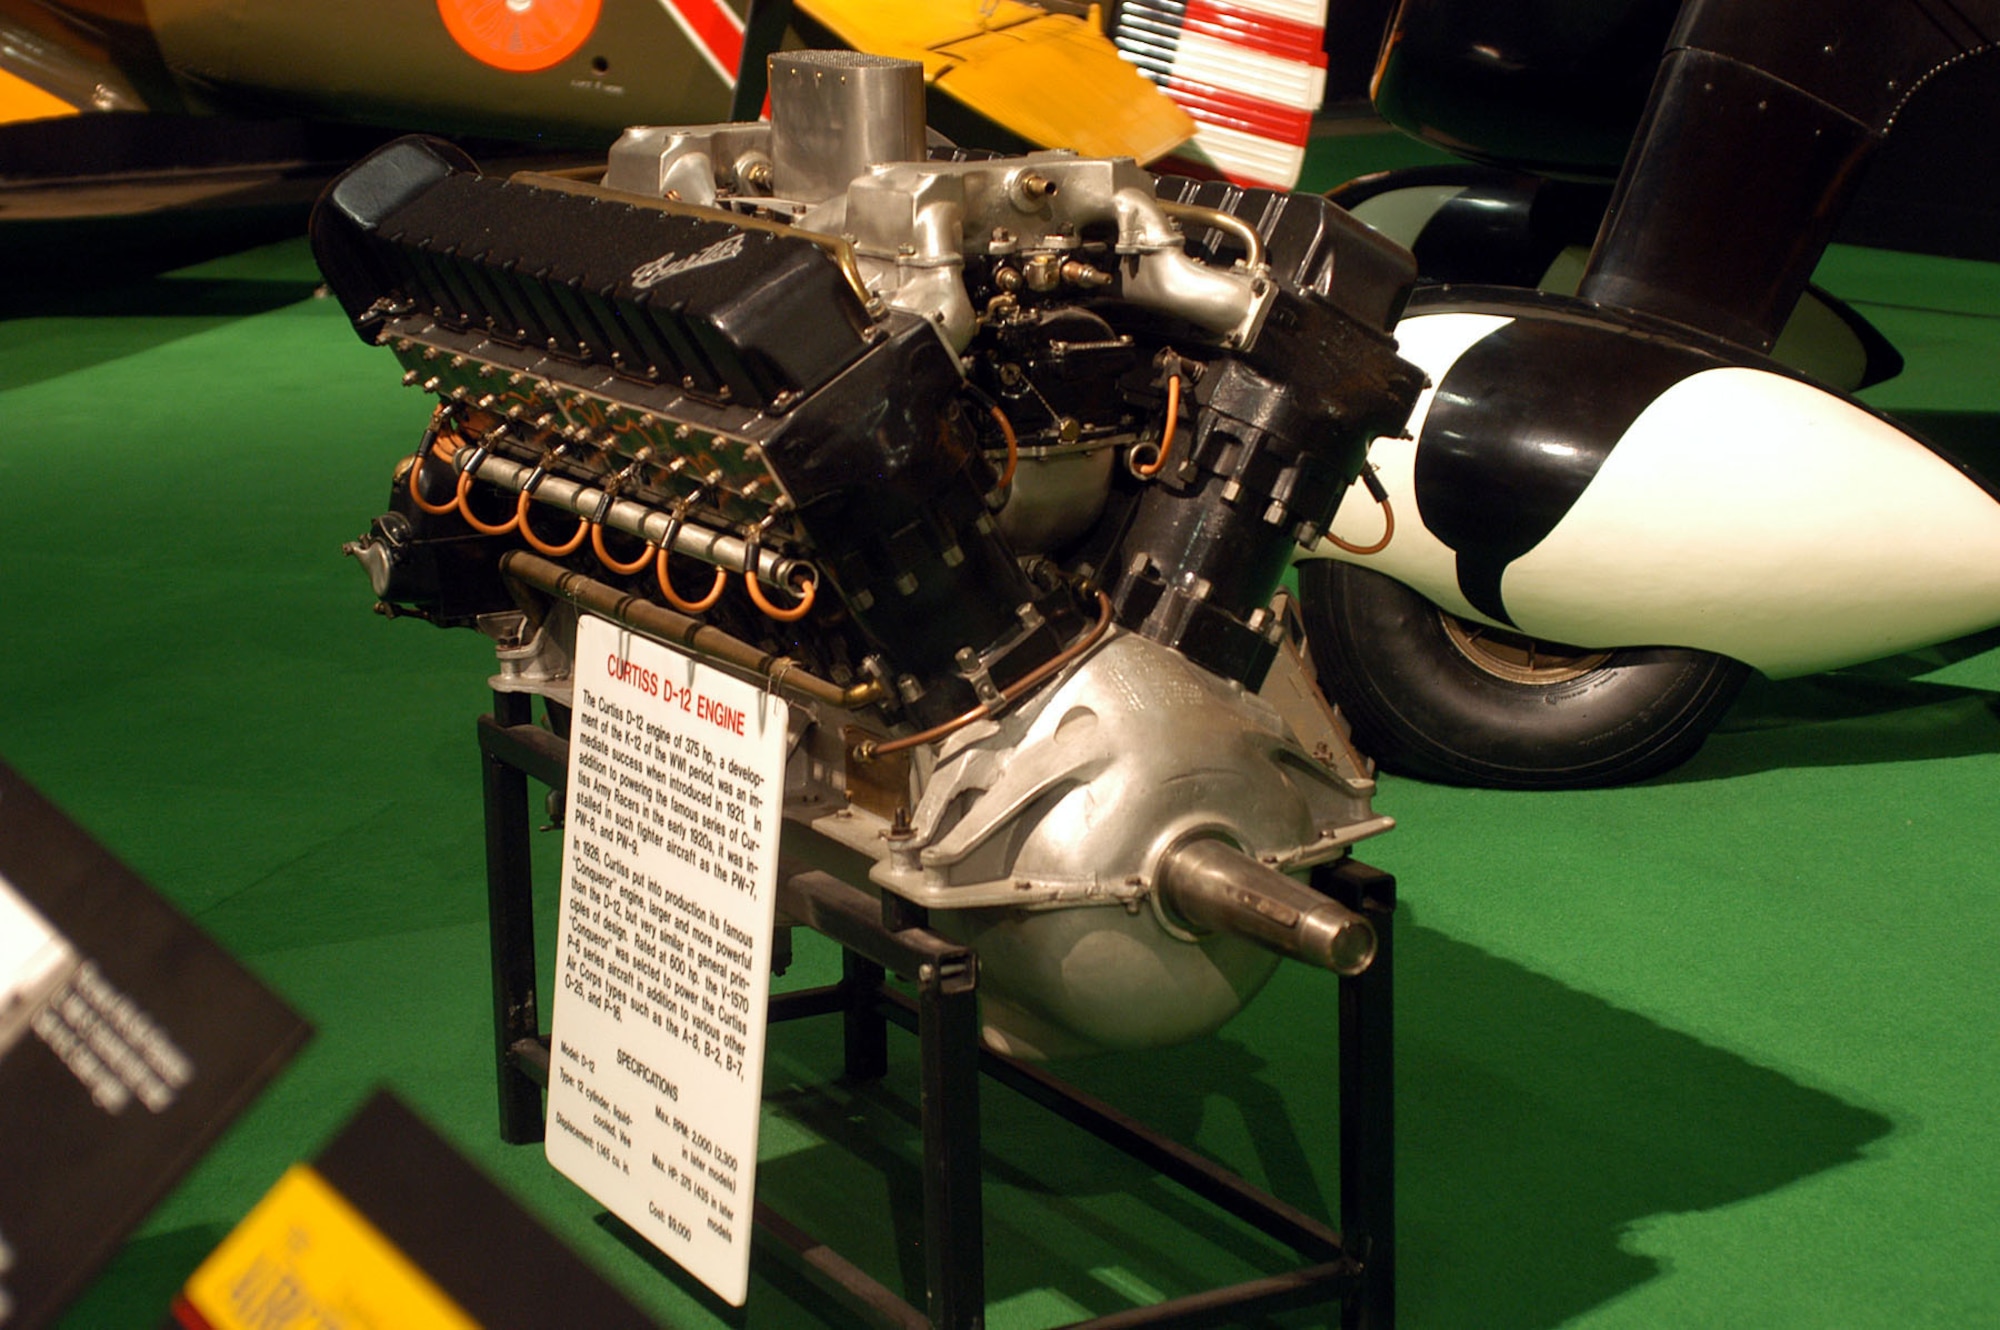 DAYTON, Ohio -- Curtiss D-12 engine at the National Museum of the United States Air Force. (U.S. Air Force photo)